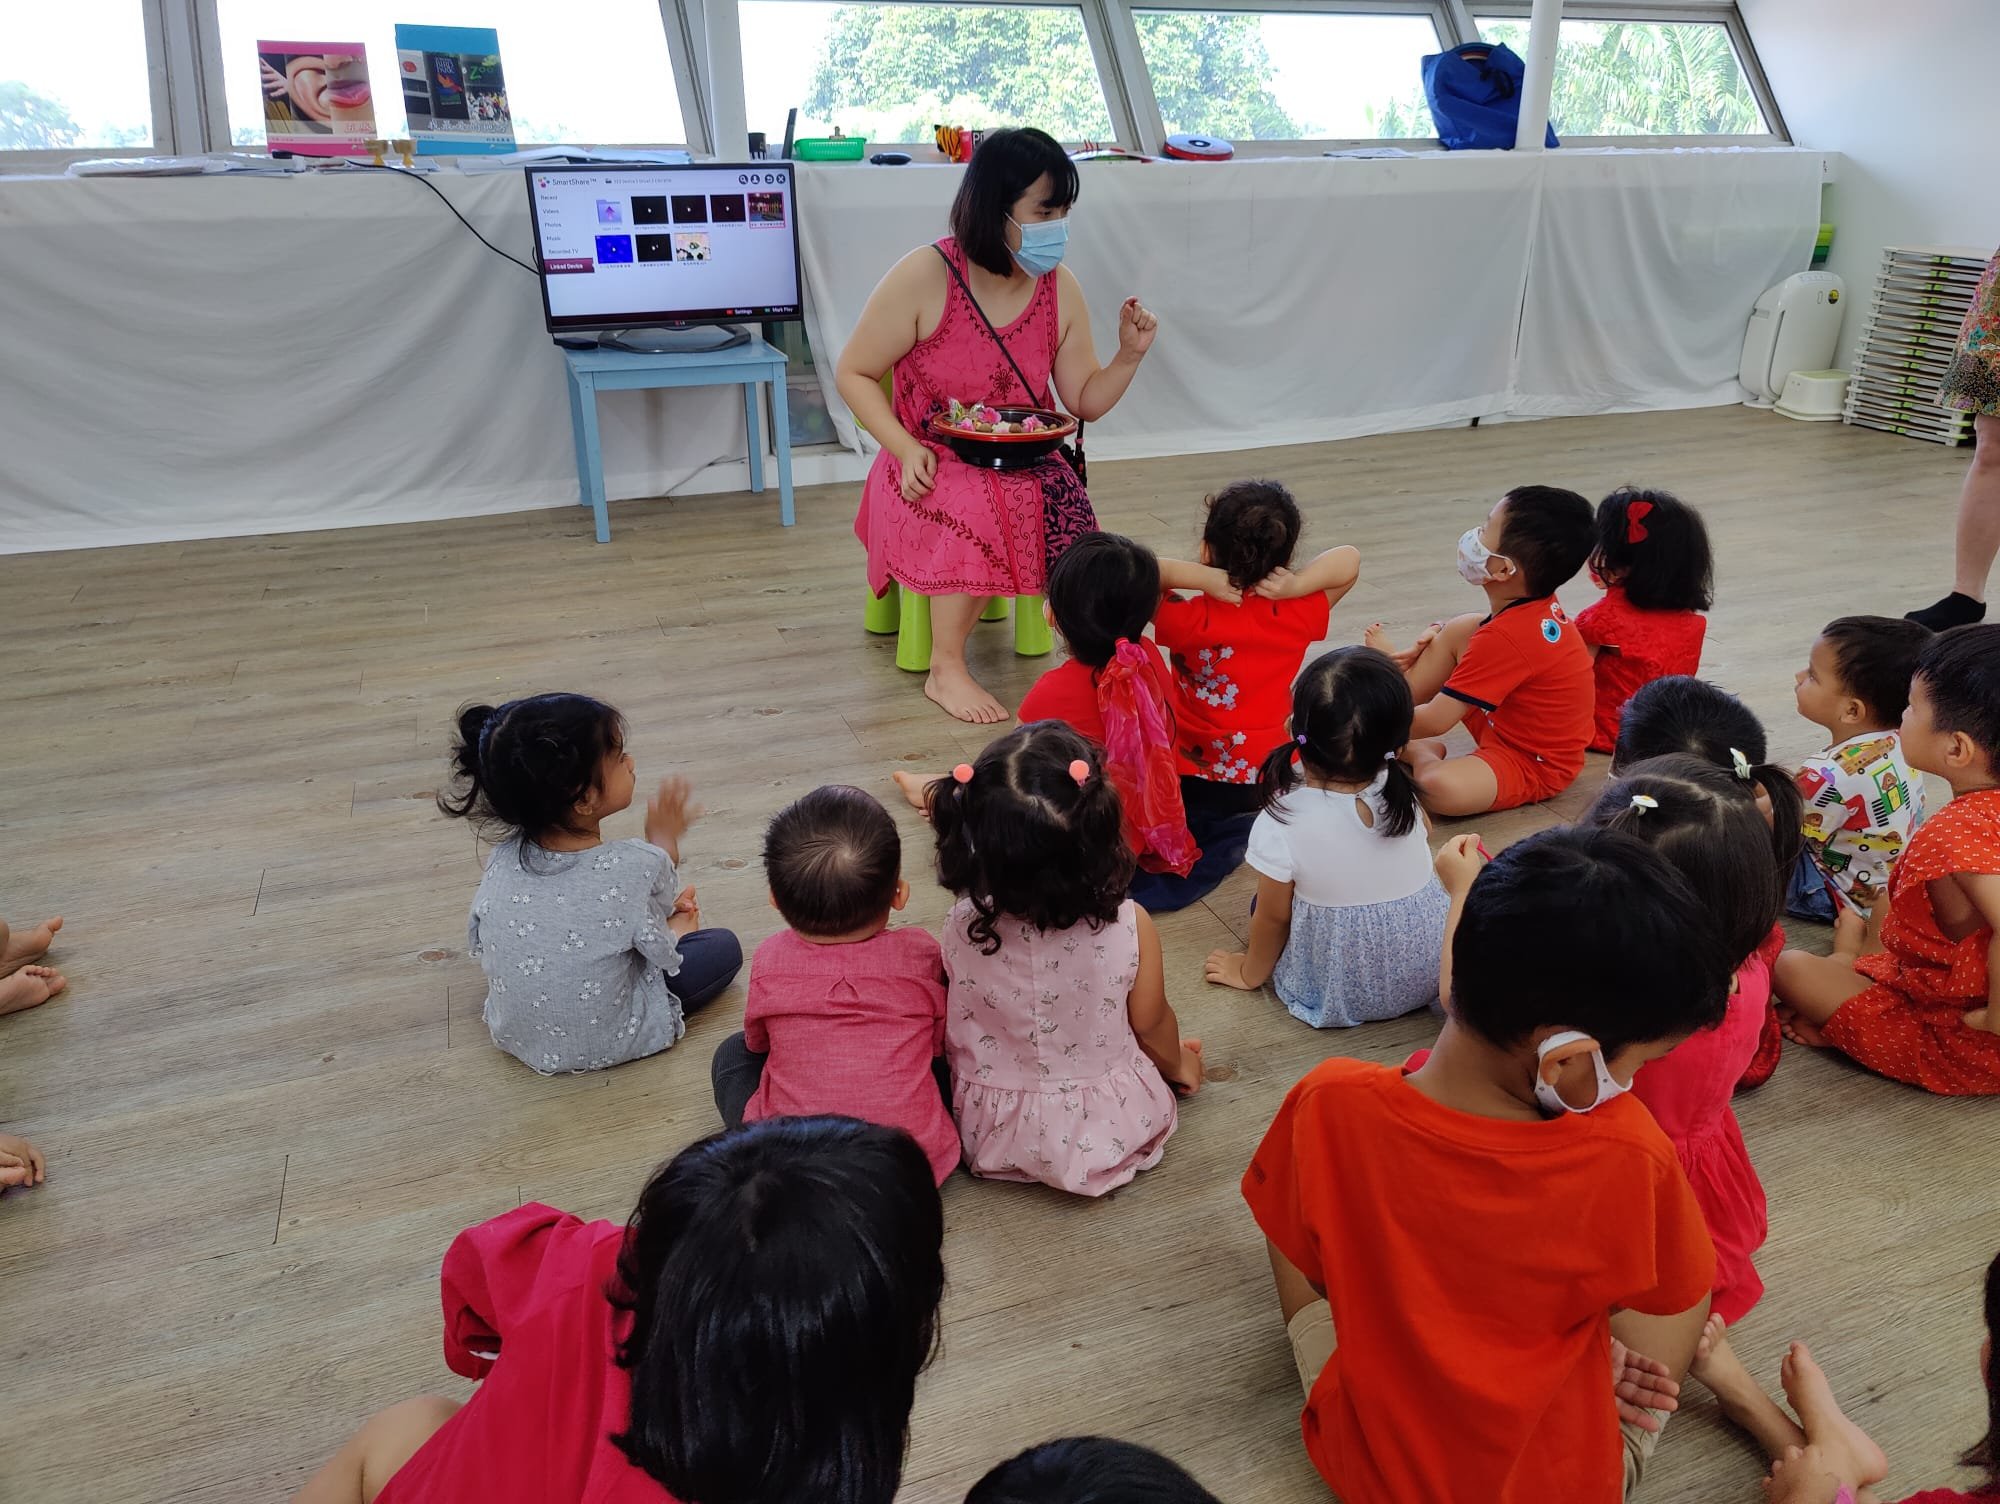  Videos were shown to them by qiu jin laoshi. The videos explained the story of how the Chinese zodiac came about. 